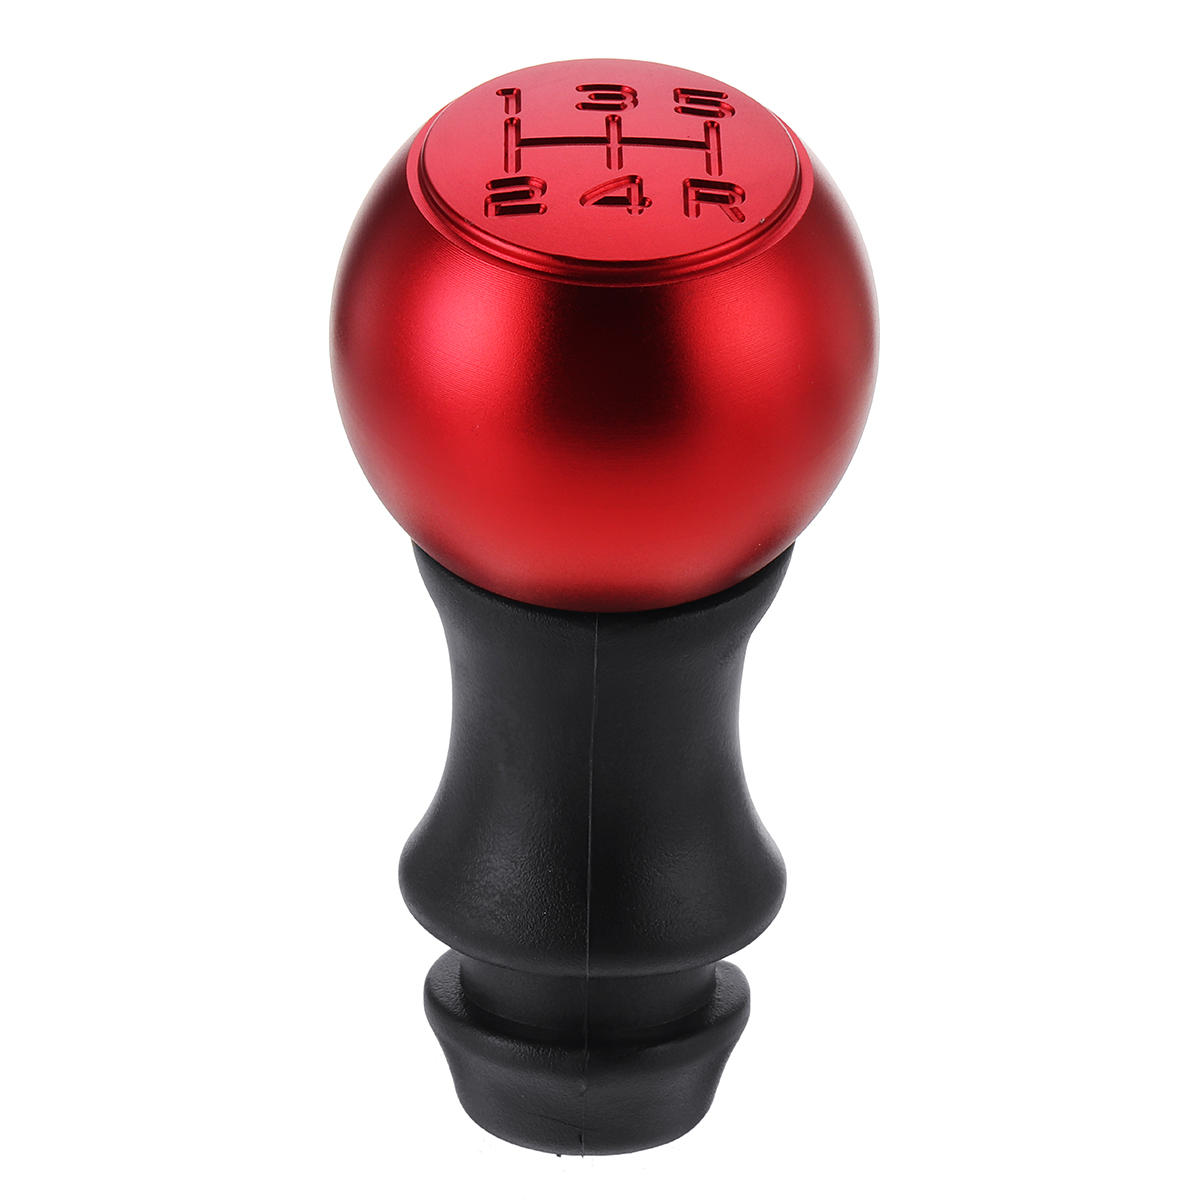 

5 Speed Alloy Gear Stick Shift Knob For Peugeot 106 206 207 307 308 406 408